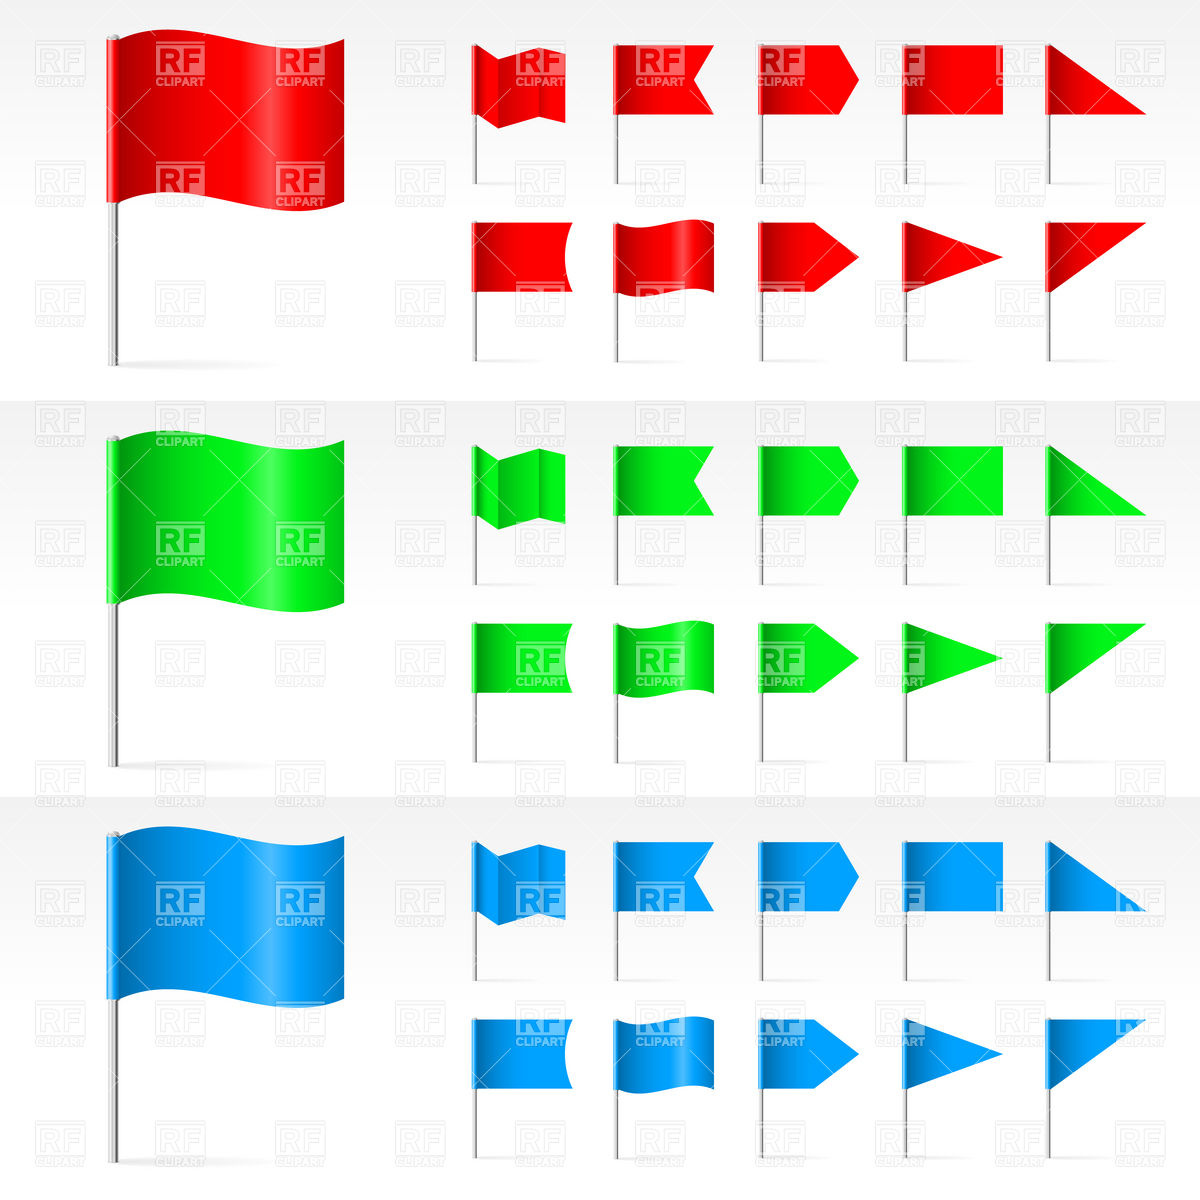 flags clipart simple